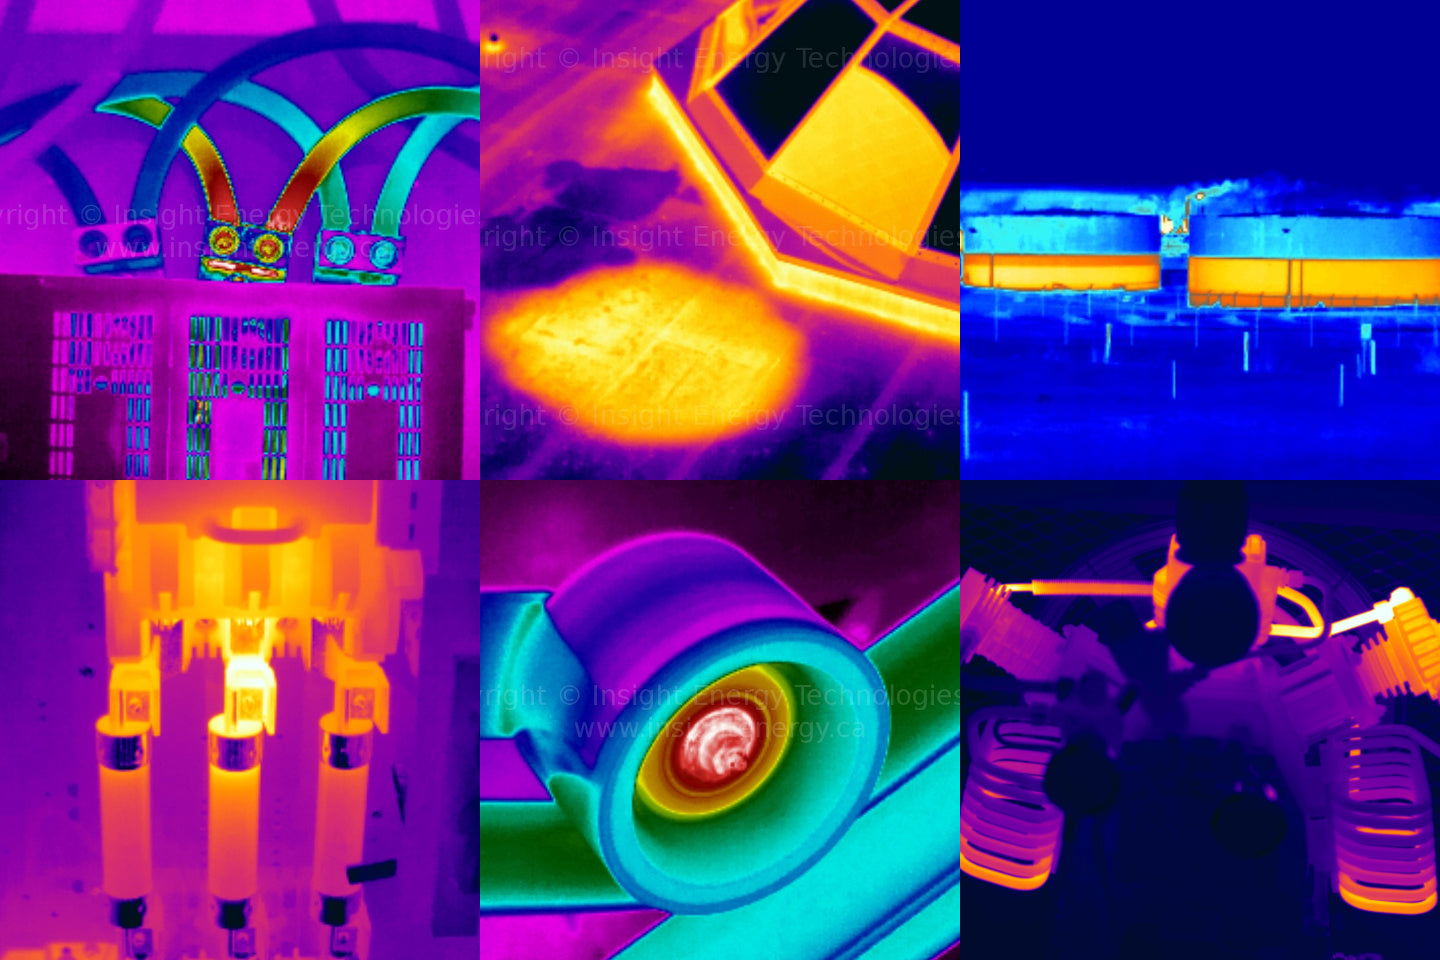 Thermal images of electrical fuses and conductors, pulley, air compressor, flat roof moisture, and storage tanks.